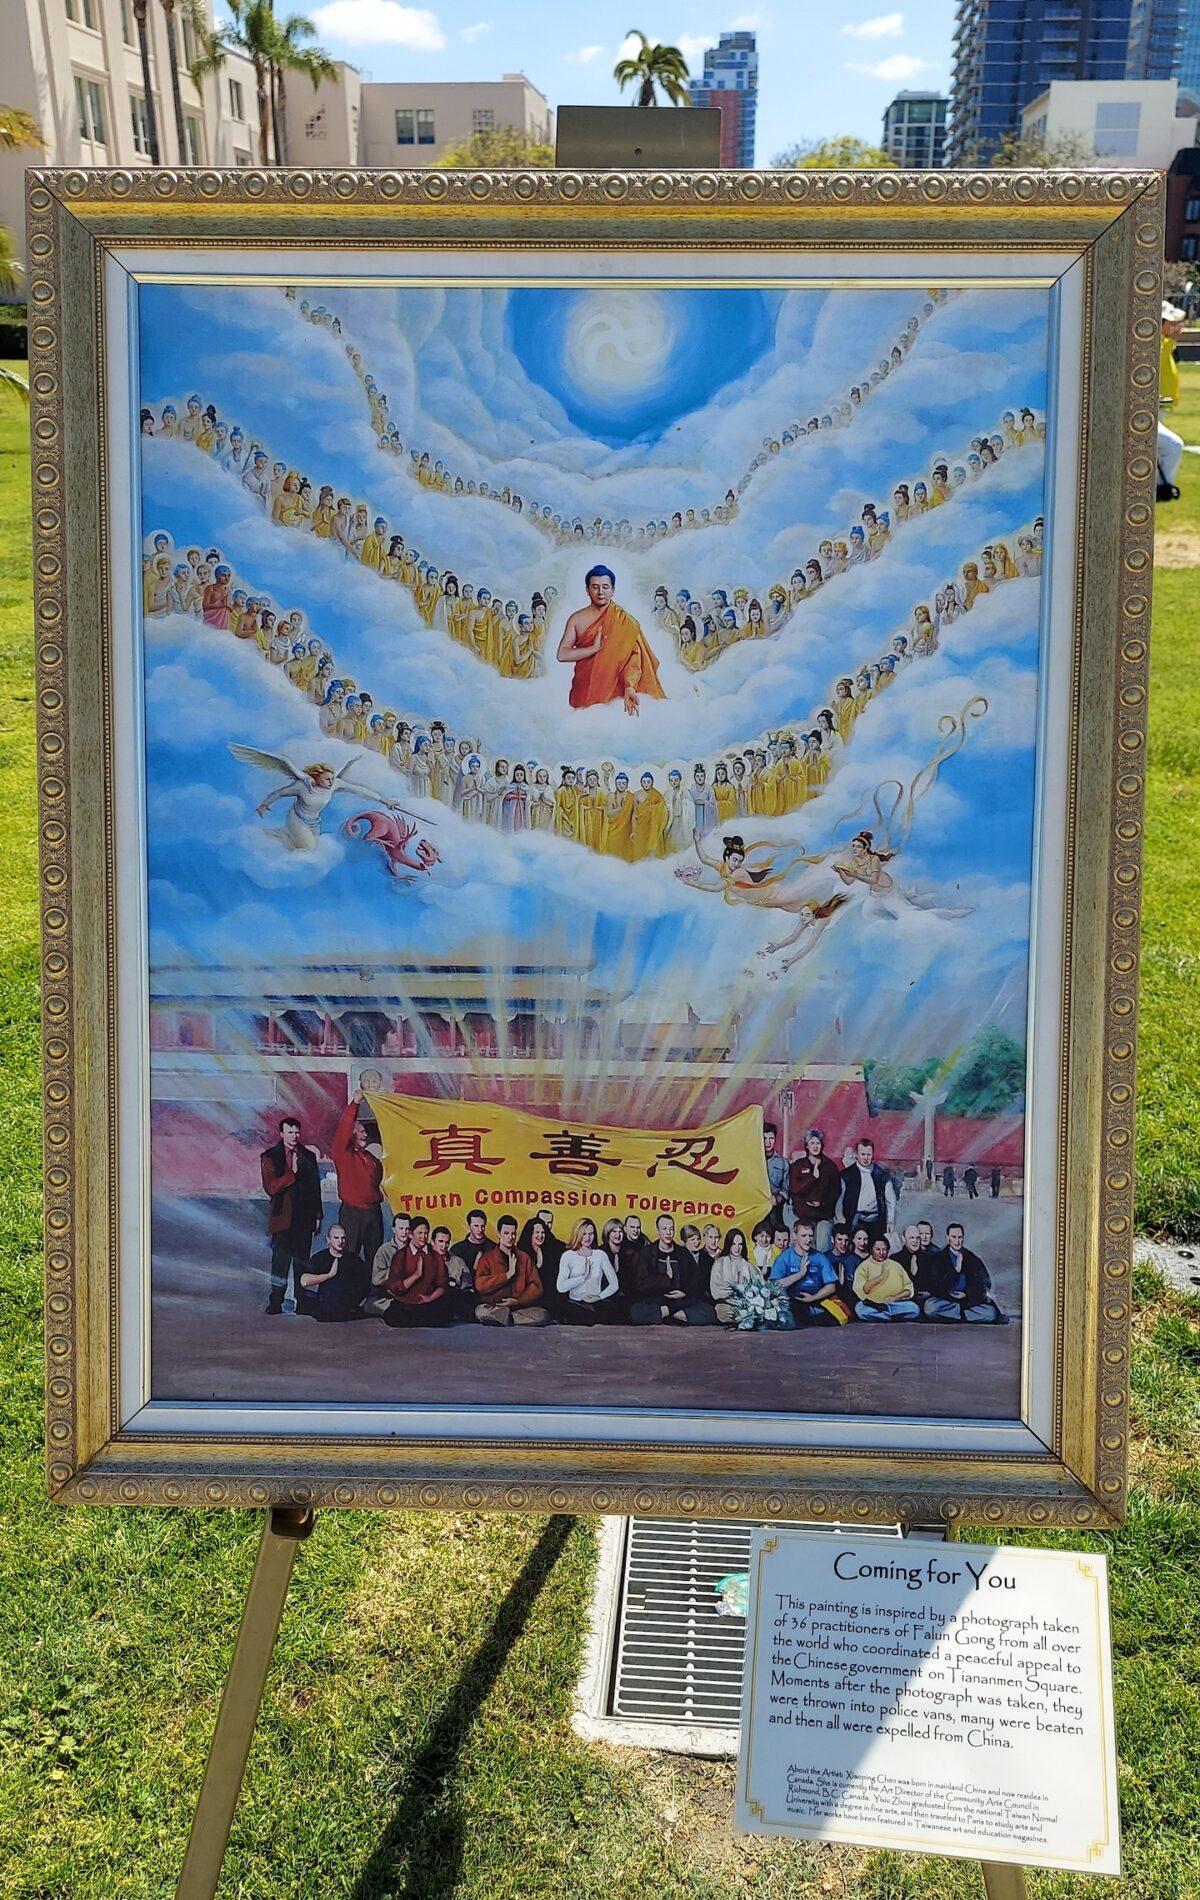 This painting, titled “Coming for You,” is based on a photograph taken at Tiananmen Square in Beijing when 36 Falun Dafa practitioners from around the world coordinated a peaceful appeal to ask the Chinese government to end the persecution of Falun Gong. (Mark Mathews/The Epoch Times)